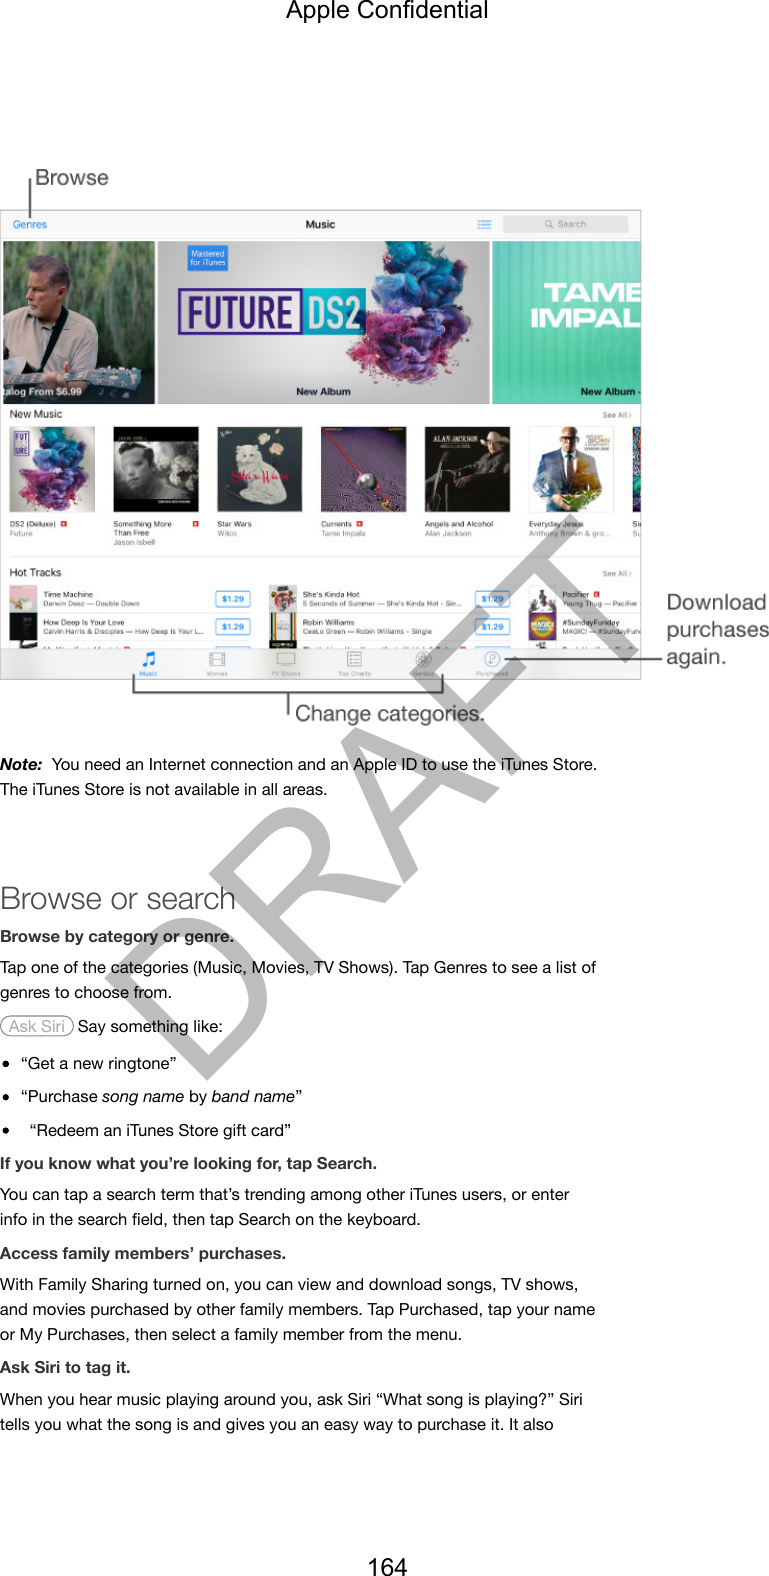 Note:  You need an Internet connection and an Apple ID to use the iTunes Store.The iTunes Store is not available in all areas.Browse or searchBrowse by category or genre.Tap one of the categories (Music, Movies, TV Shows). Tap Genres to see a list ofgenres to choose from. Ask Siri  Say something like:“Get a new ringtone”“Purchase song name by band name”“Redeem an iTunes Store gift card”If you know what you’re looking for, tap Search.You can tap a search term that’s trending among other iTunes users, or enterinfo in the search ﬁeld, then tap Search on the keyboard.Access family members’ purchases.With Family Sharing turned on, you can view and download songs, TV shows,and movies purchased by other family members. Tap Purchased, tap your nameor My Purchases, then select a family member from the menu.Ask Siri to tag it.When you hear music playing around you, ask Siri “What song is playing?” Siritells you what the song is and gives you an easy way to purchase it. It alsoApple Confidential164DRAFT